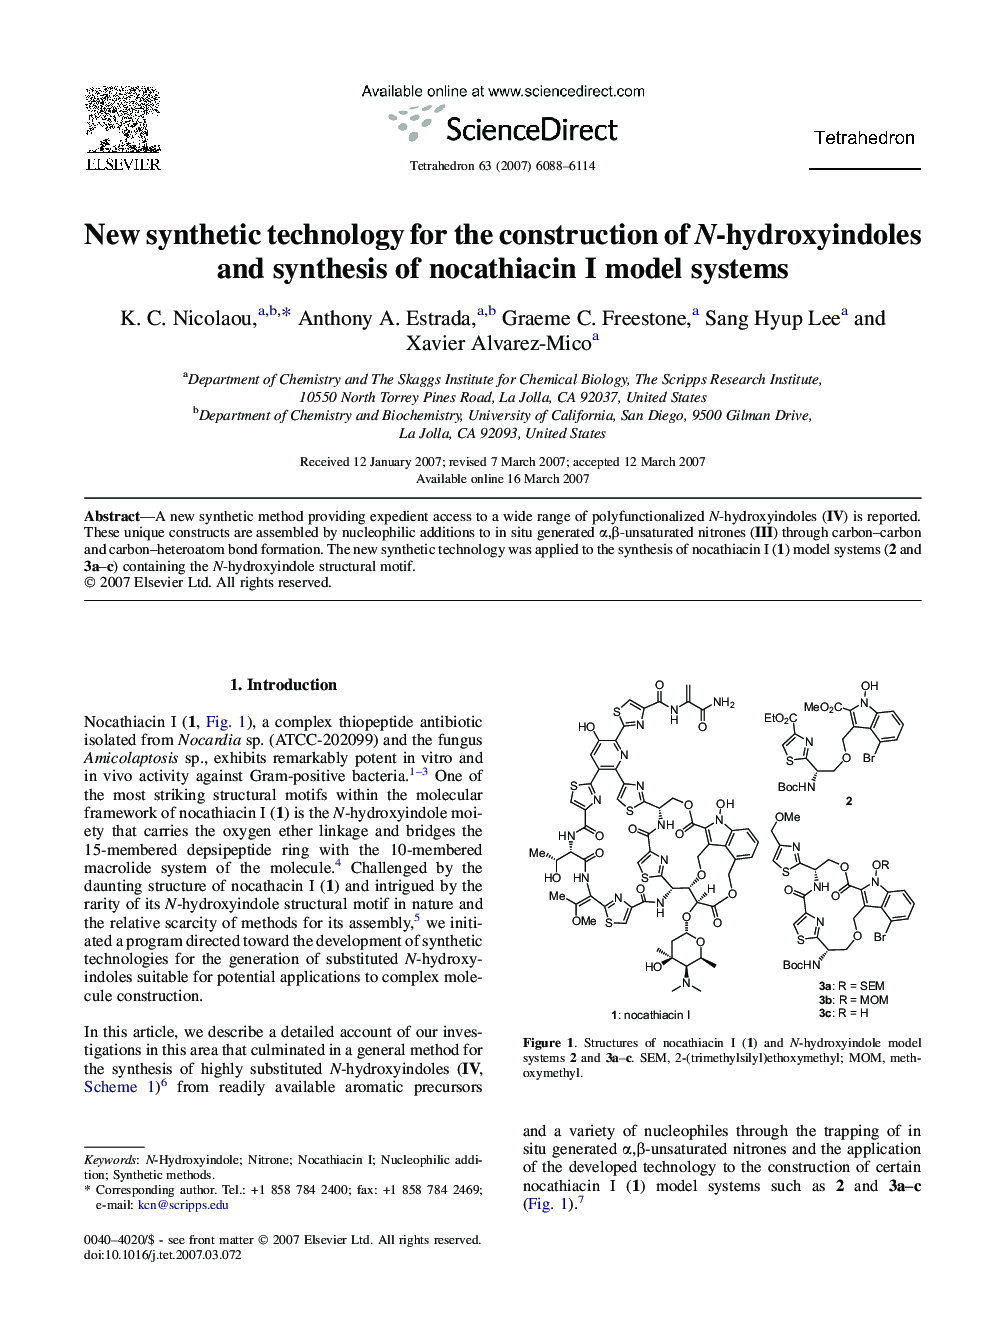 New synthetic technology for the construction of N-hydroxyindoles and synthesis of nocathiacin I model systems